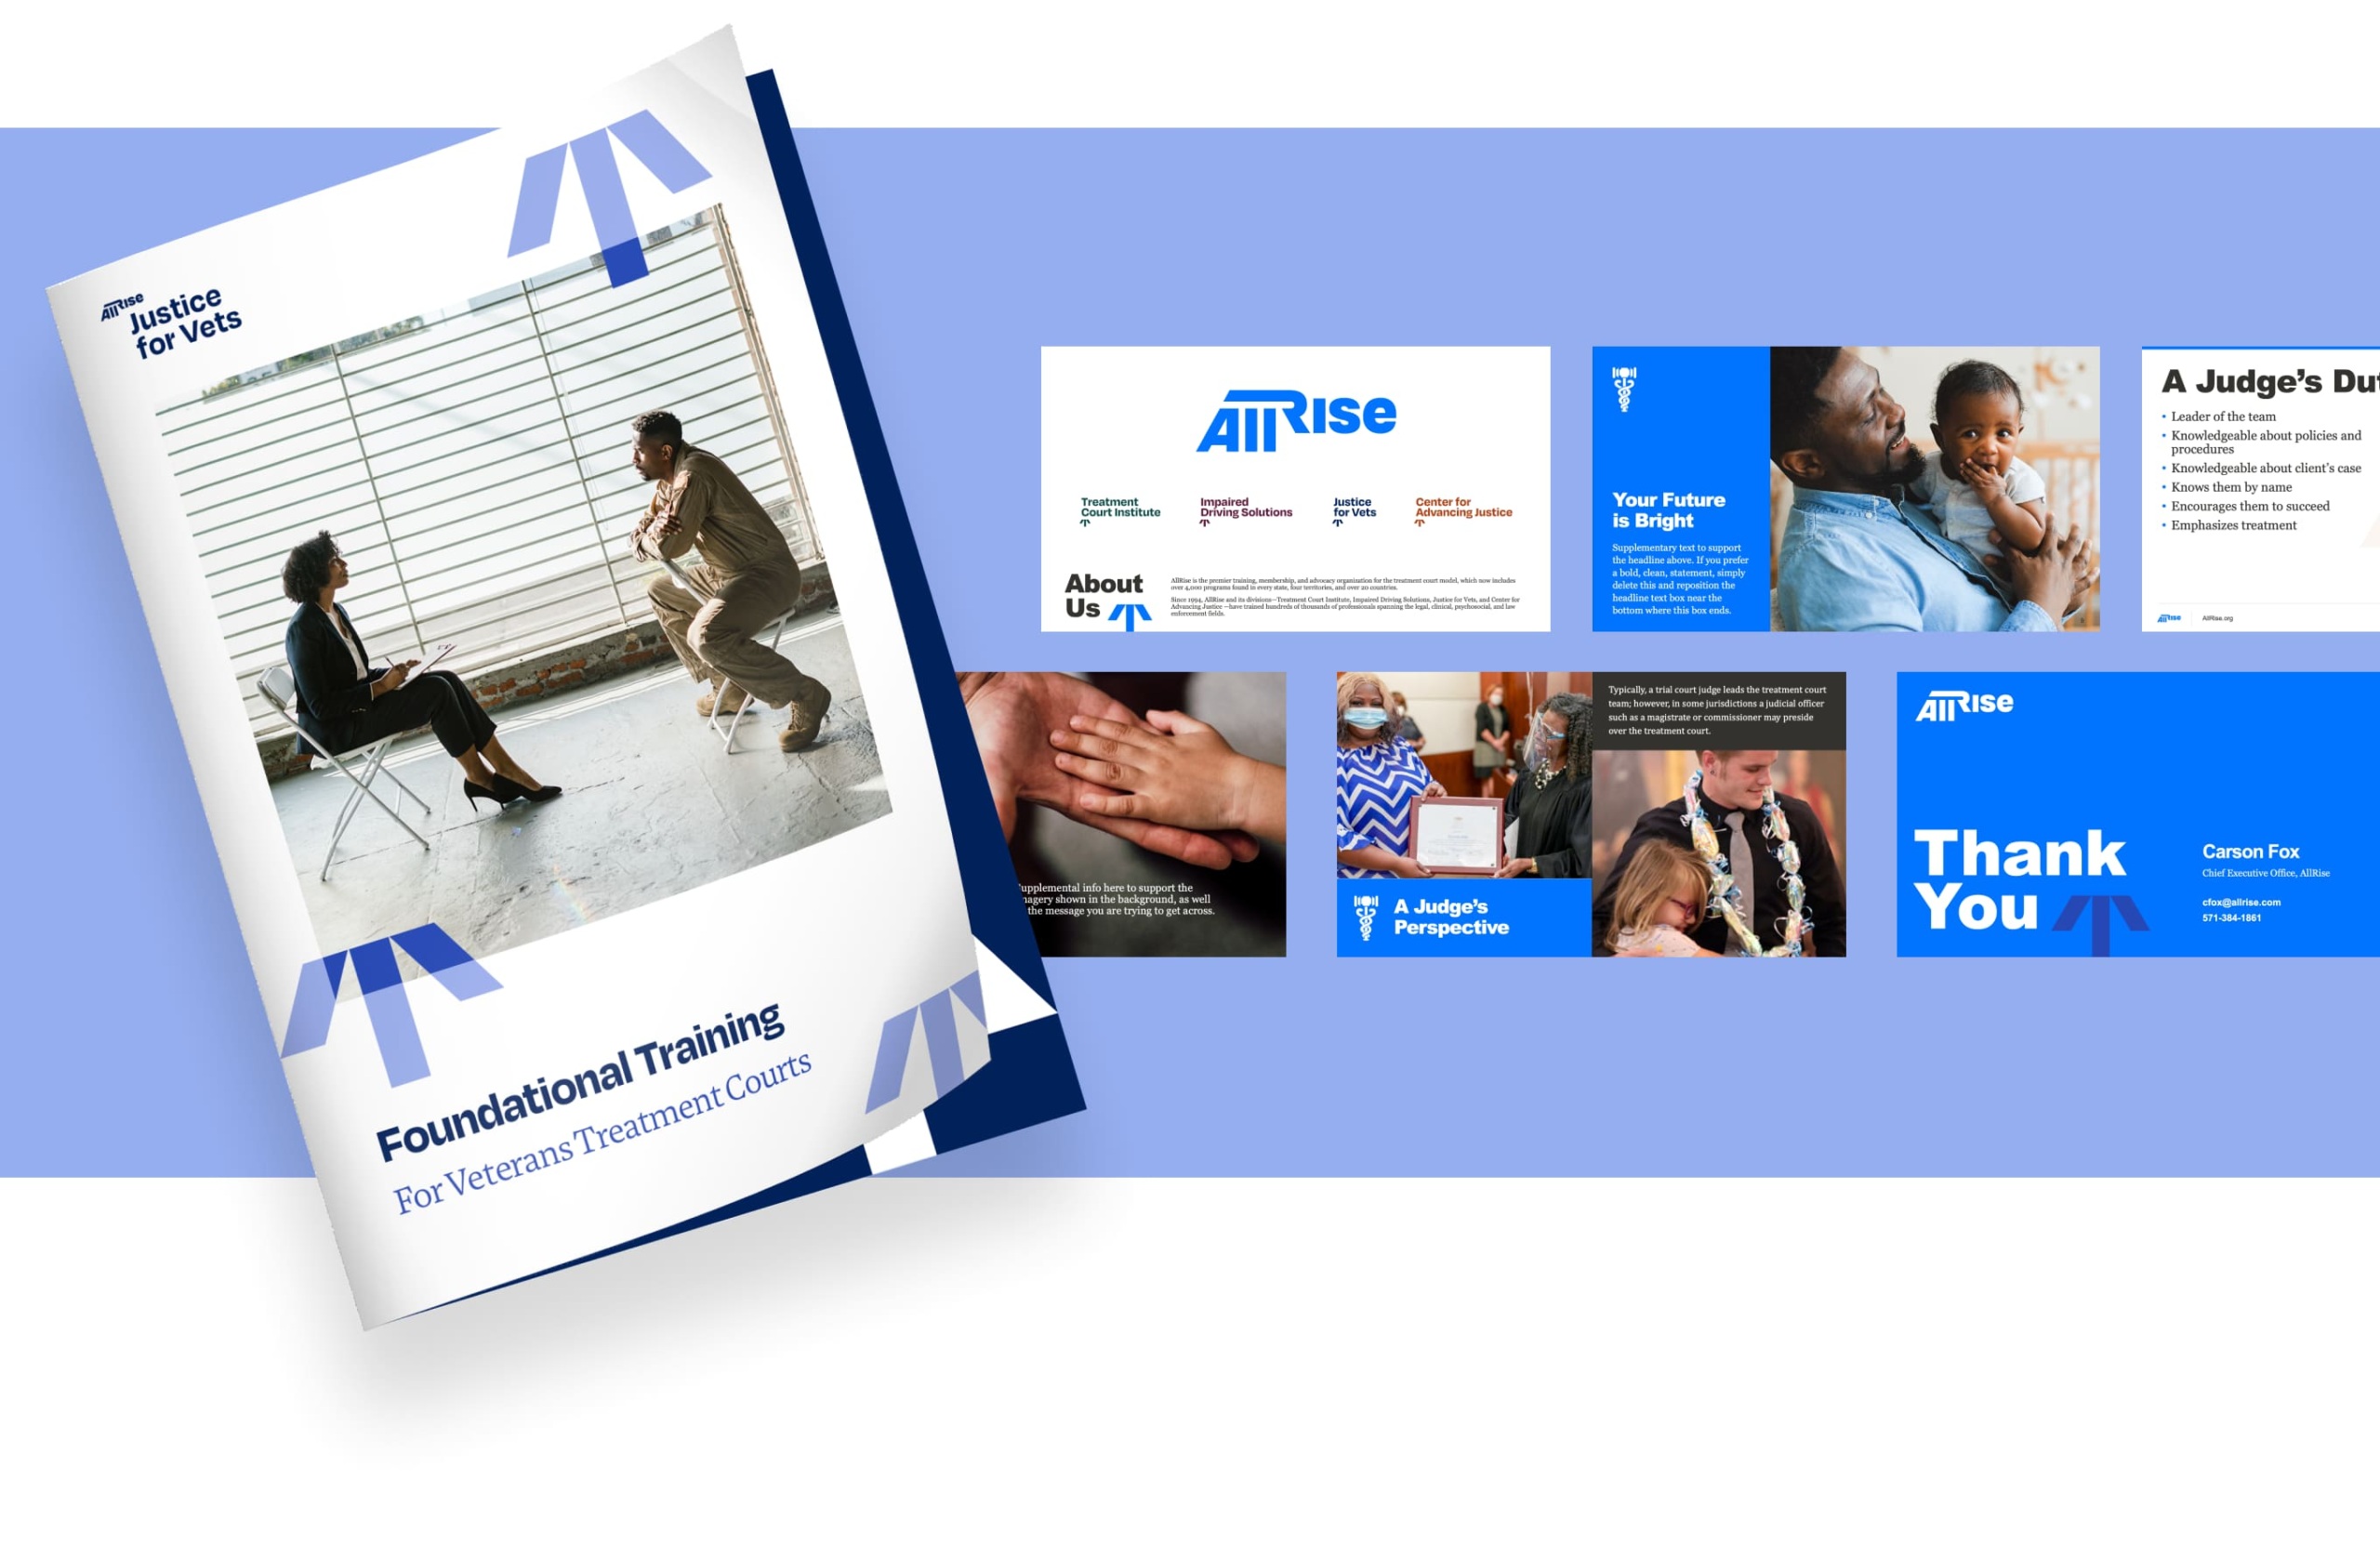 A sample selection of powerpoint slide templates and a publication cover design.